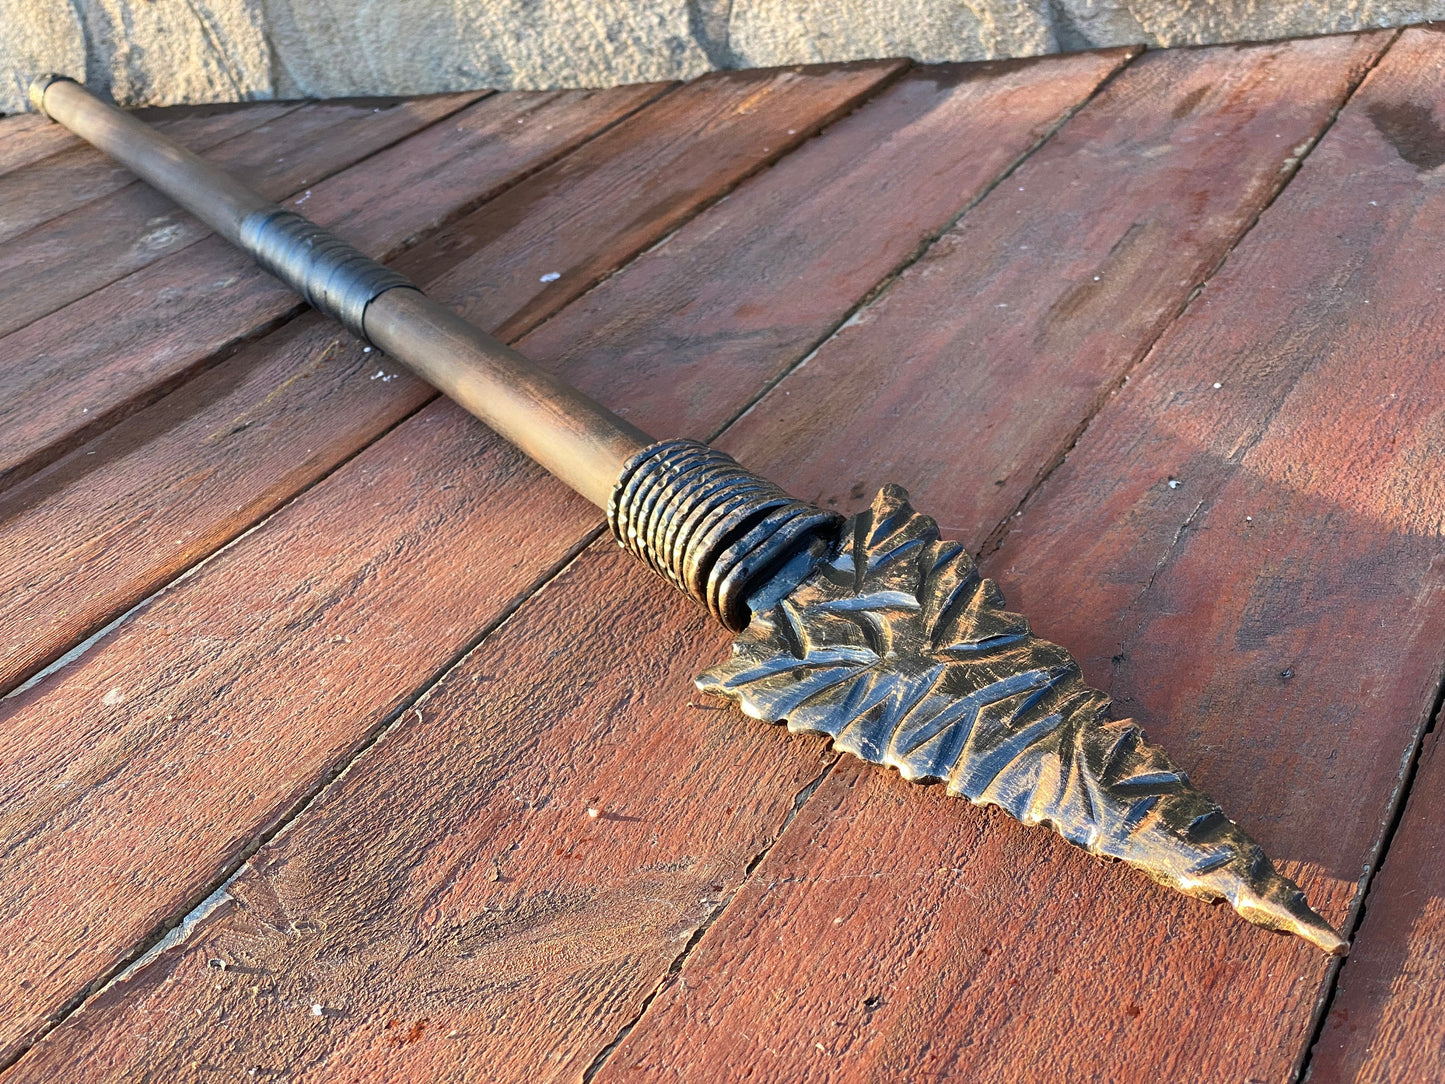 Spear, cosplay spear, viking spear, medieval, birthday, viking, Christmas, cosplay, steel gift, anniversary, personalized gift, iron gift